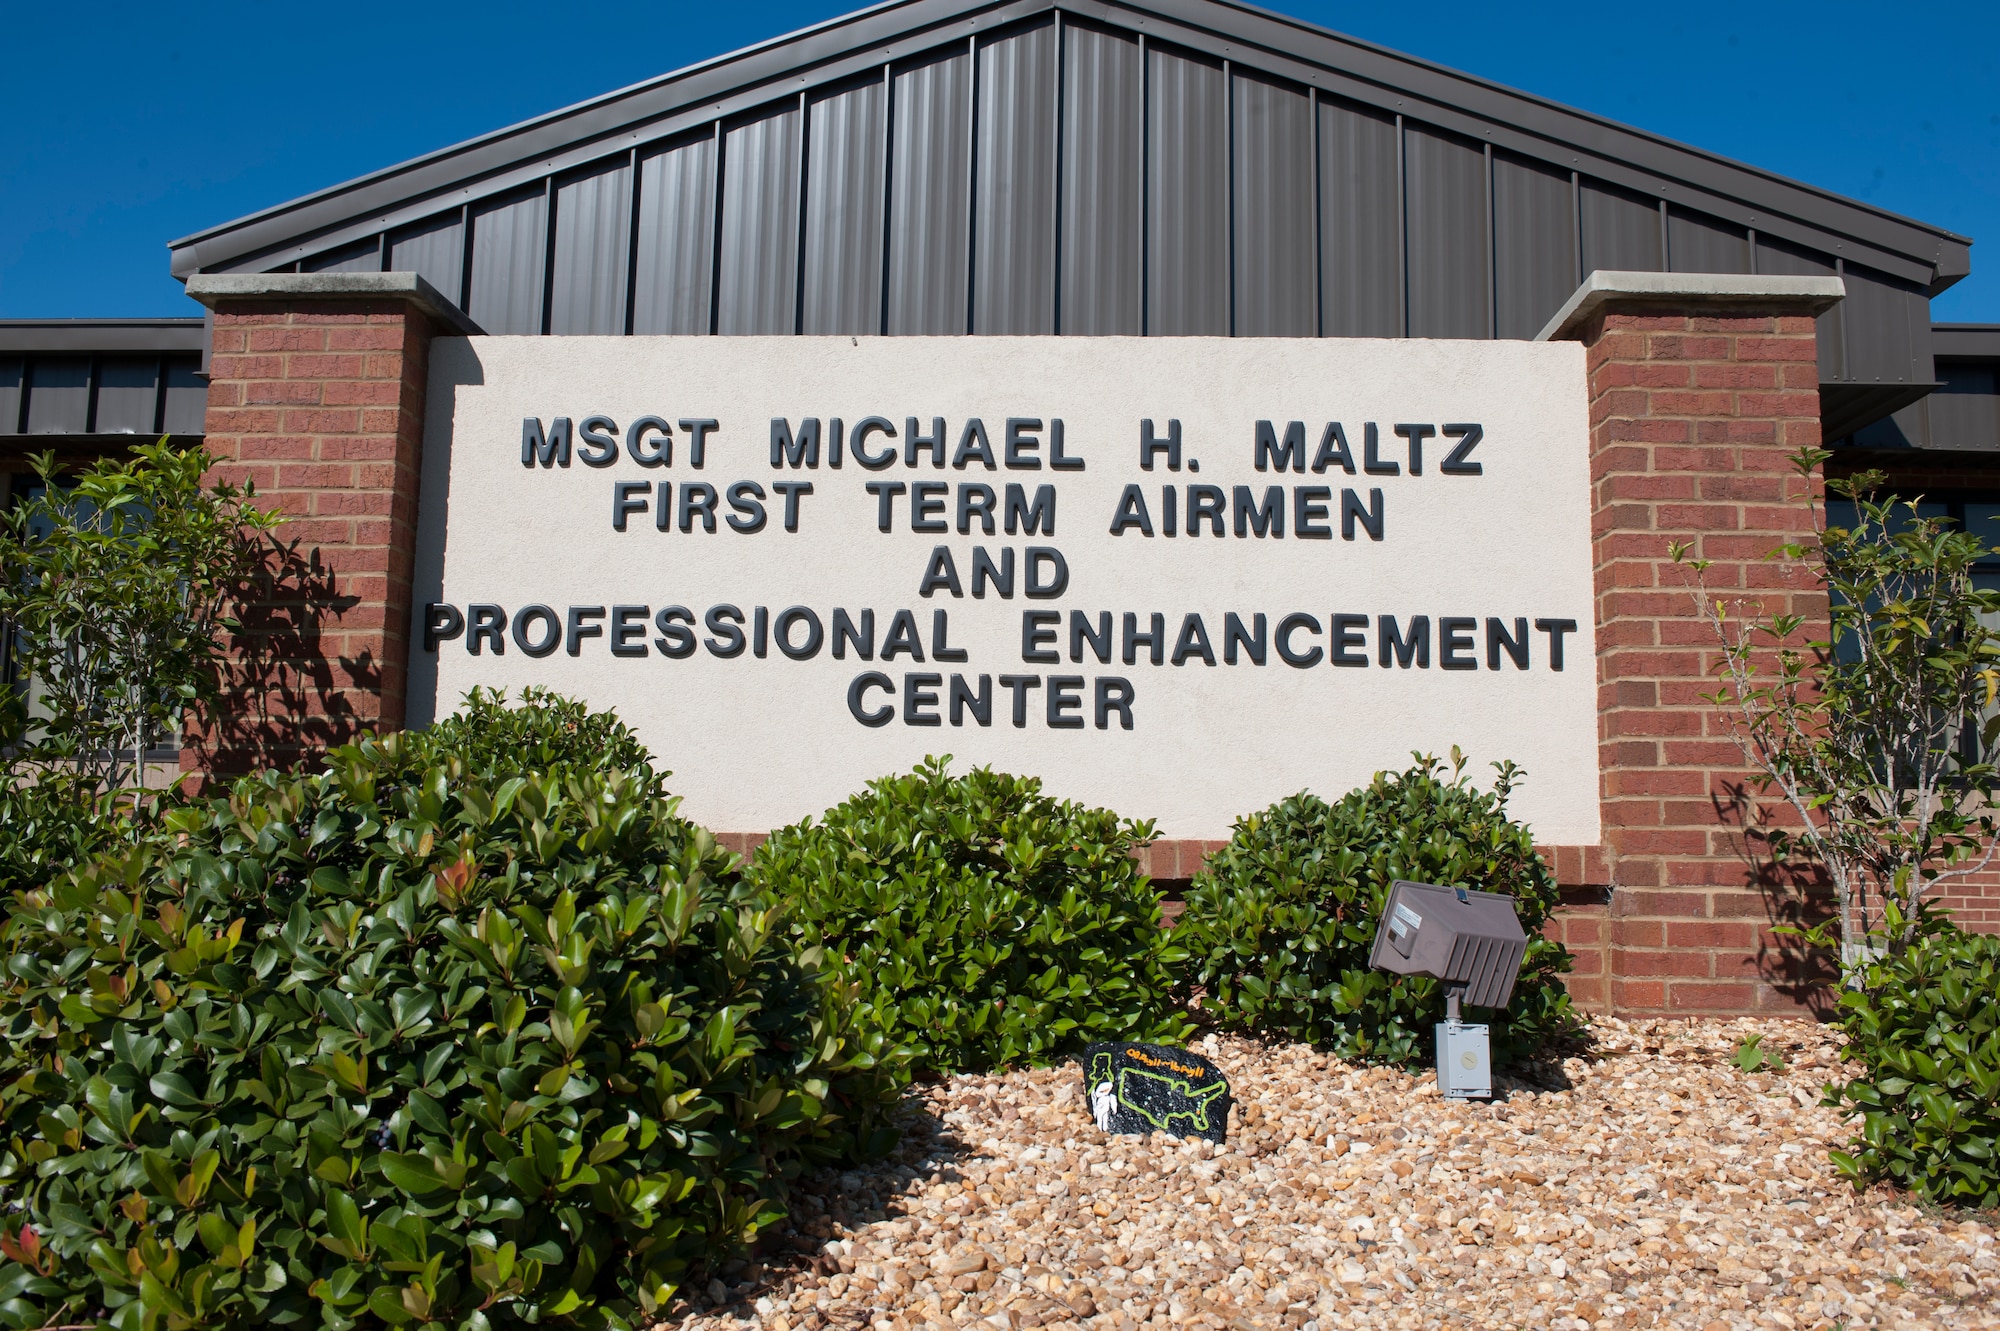 A sign in front of the First Term Airmen and Professional Enhancement Center shows the name of U.S. Air Force Master Sgt. Michael Maltz, a pararescueman who died in an HH-60G Pave Hawk crash while on a rescue mission in Afghanistan. Kyle Maltz, Sergeant Maltz’s son, last visited Moody Air Force Base, Ga., in 2008 when the center was dedicated to his father. (U.S. Air Force photo by Airman 1st Class Jarrod Grammel/Released)
